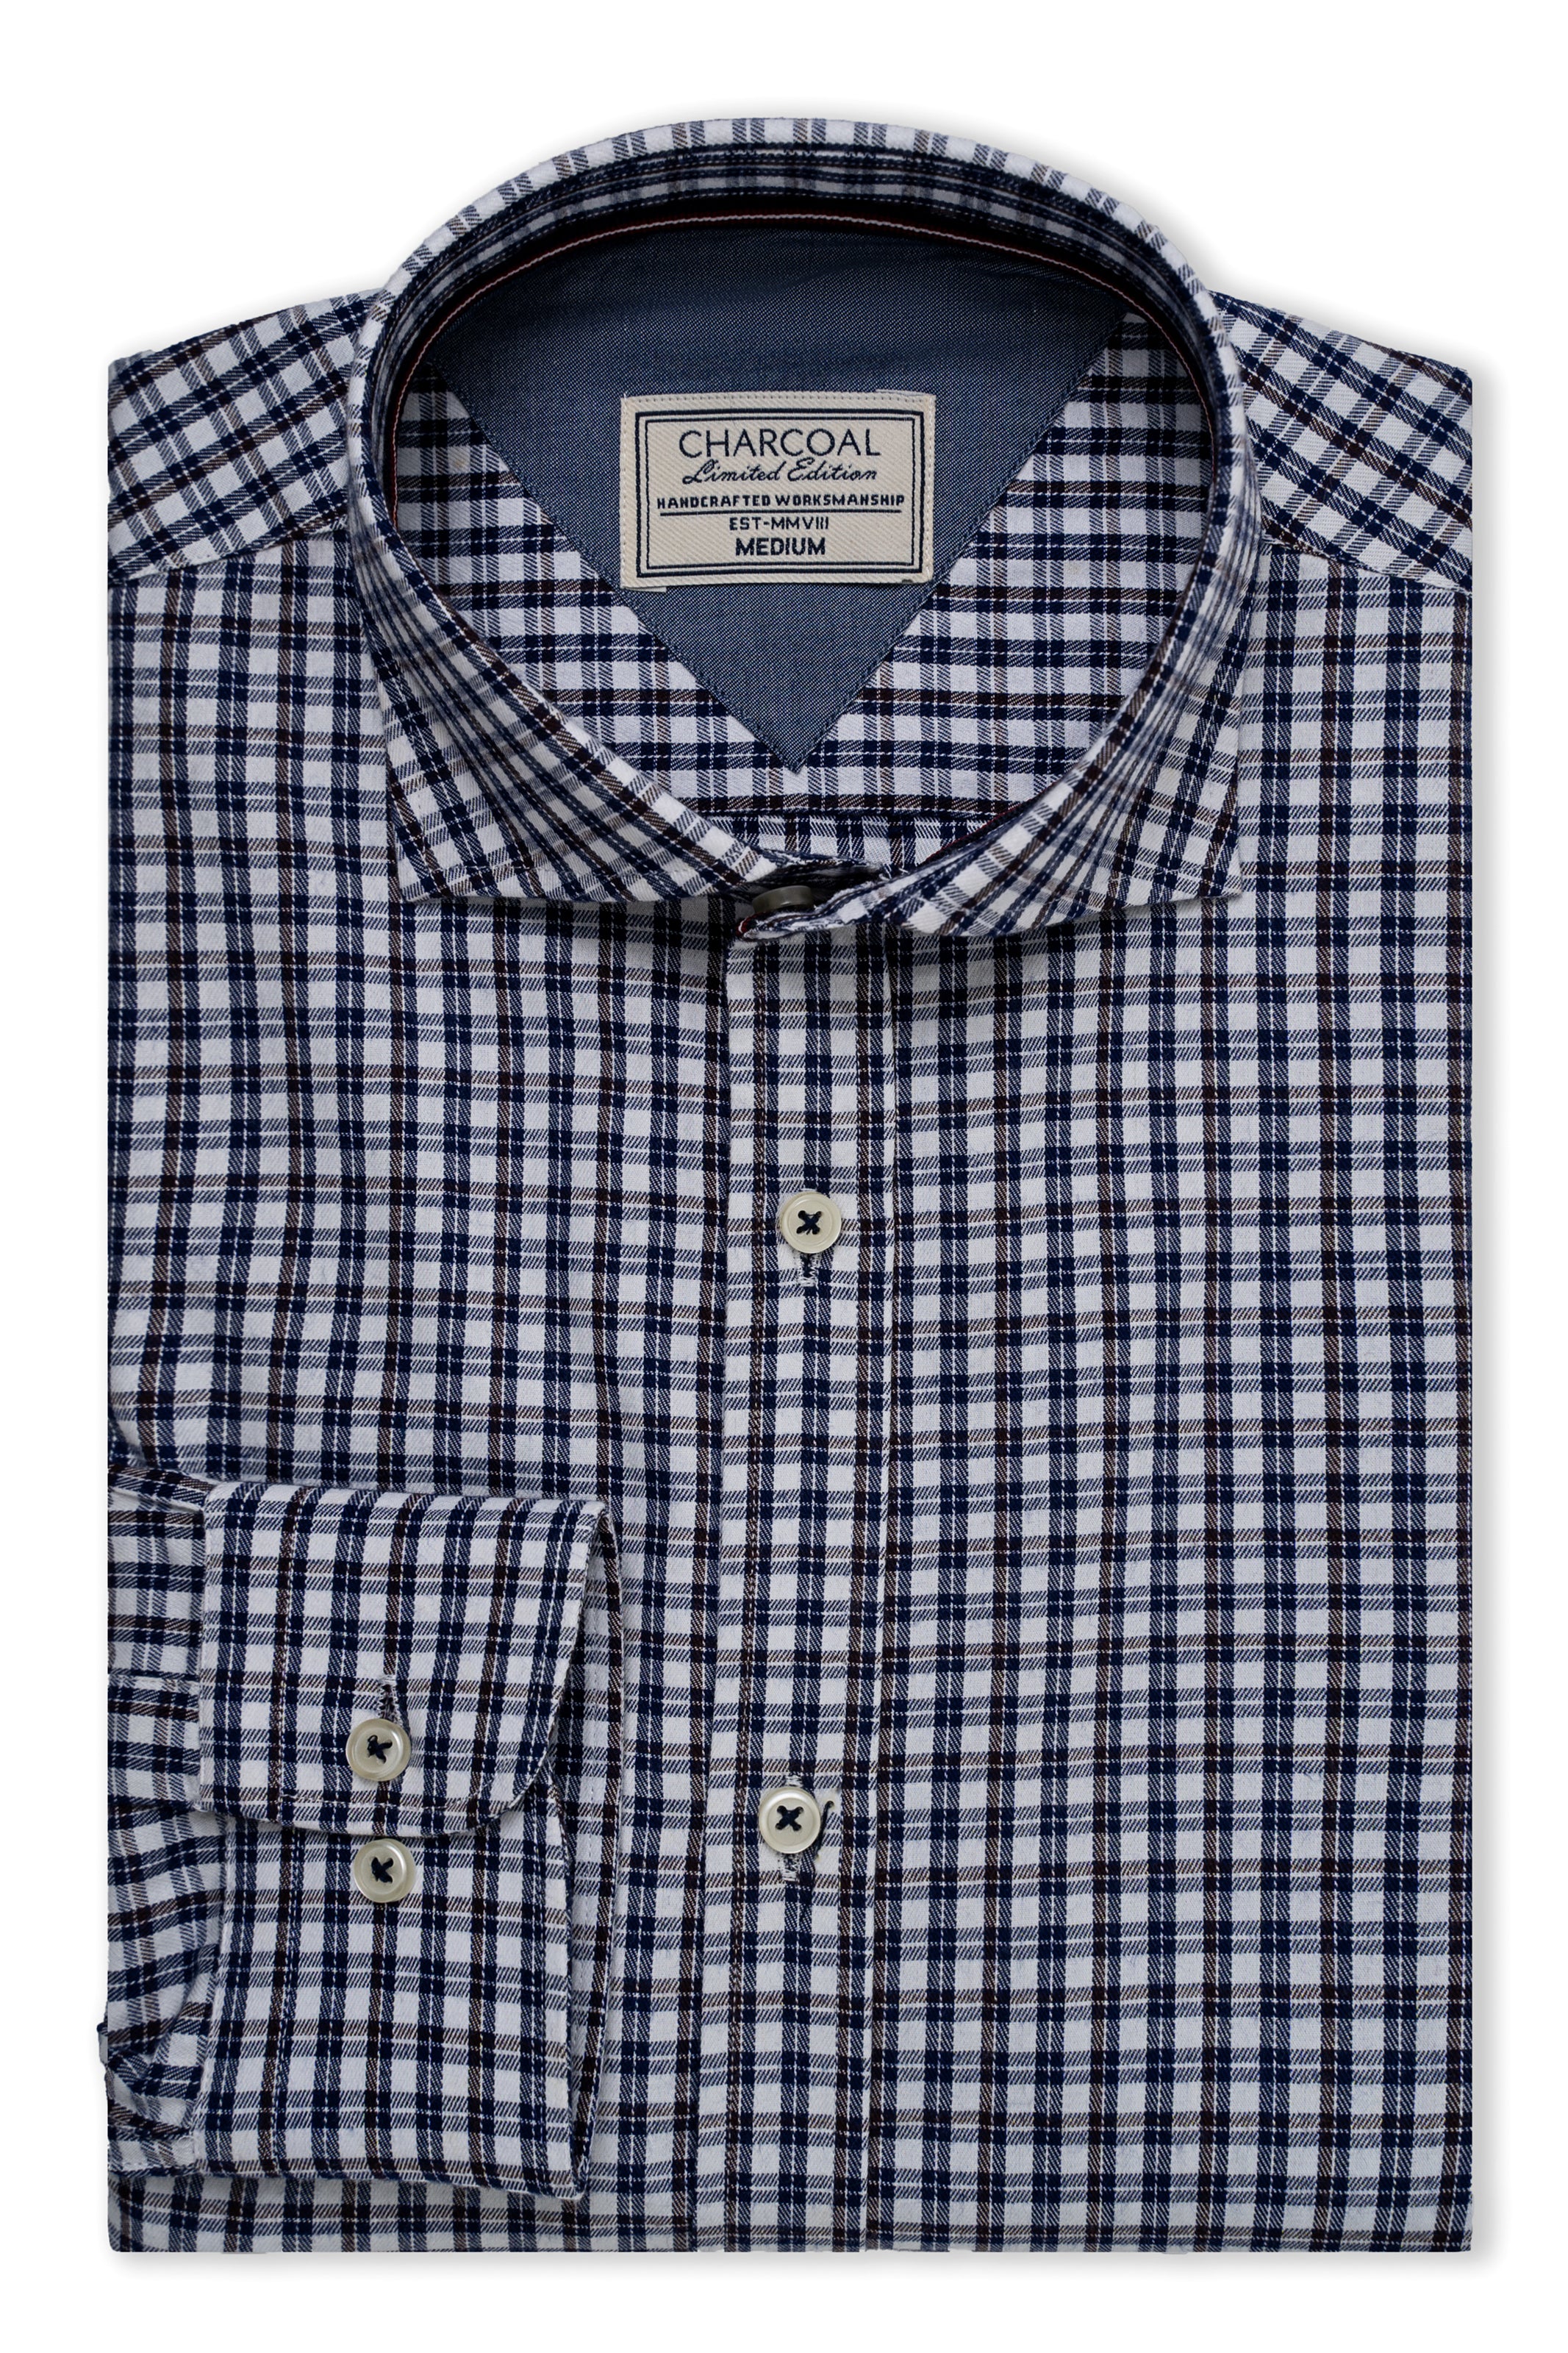 LIMITED EDITION SHIRT BLUE WHITE CHECK